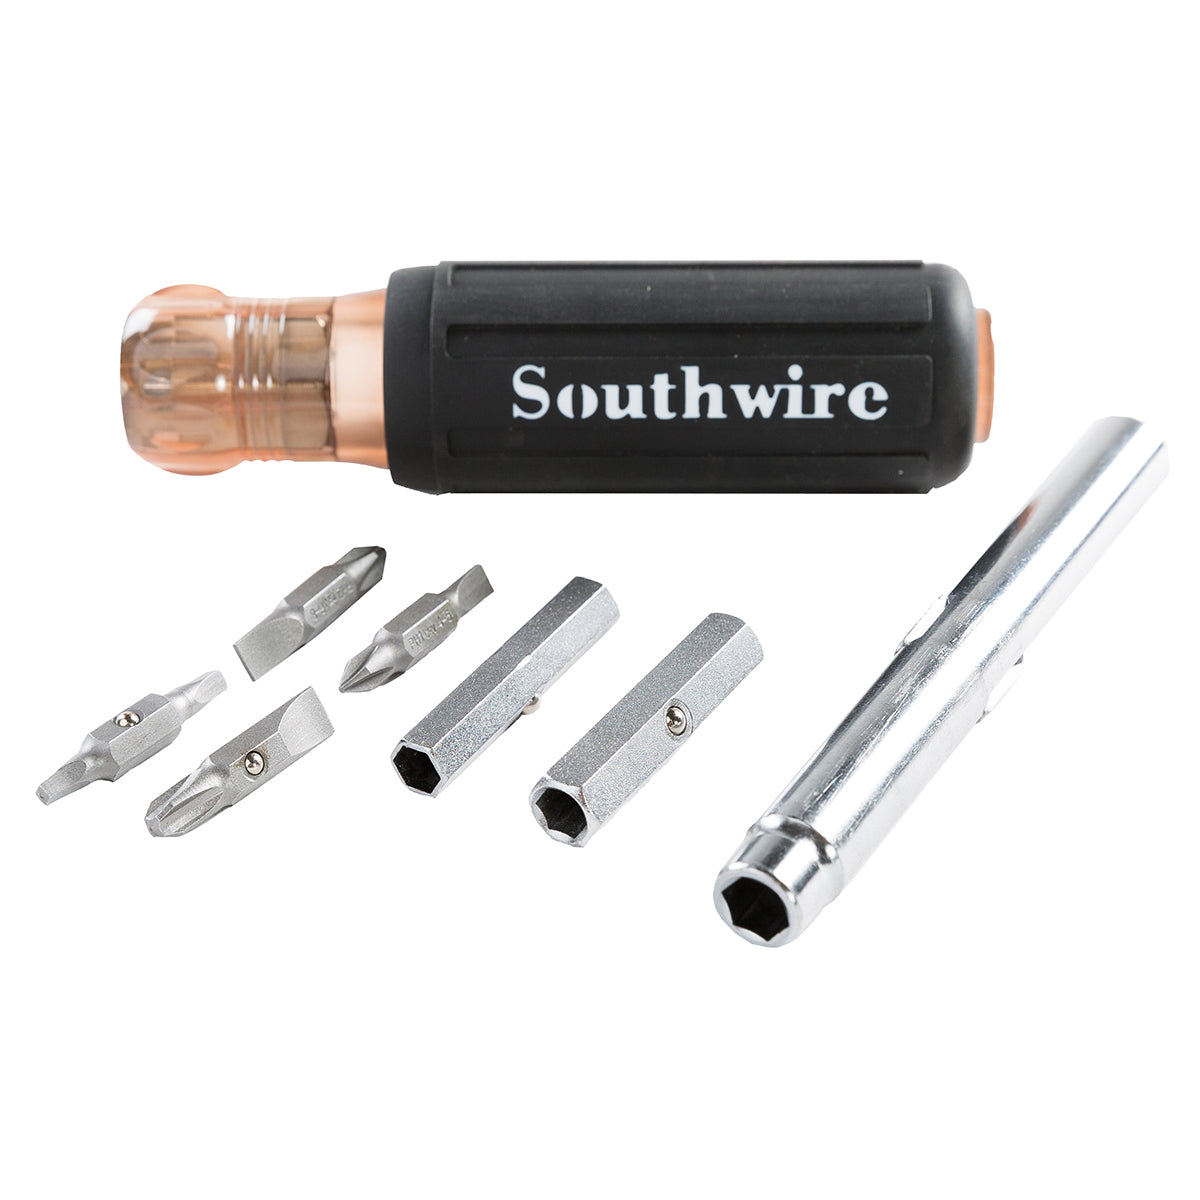 Southwire 12-N-1 Multi-Tool Screwdriver w/ Precision Machined Quick Change Bits